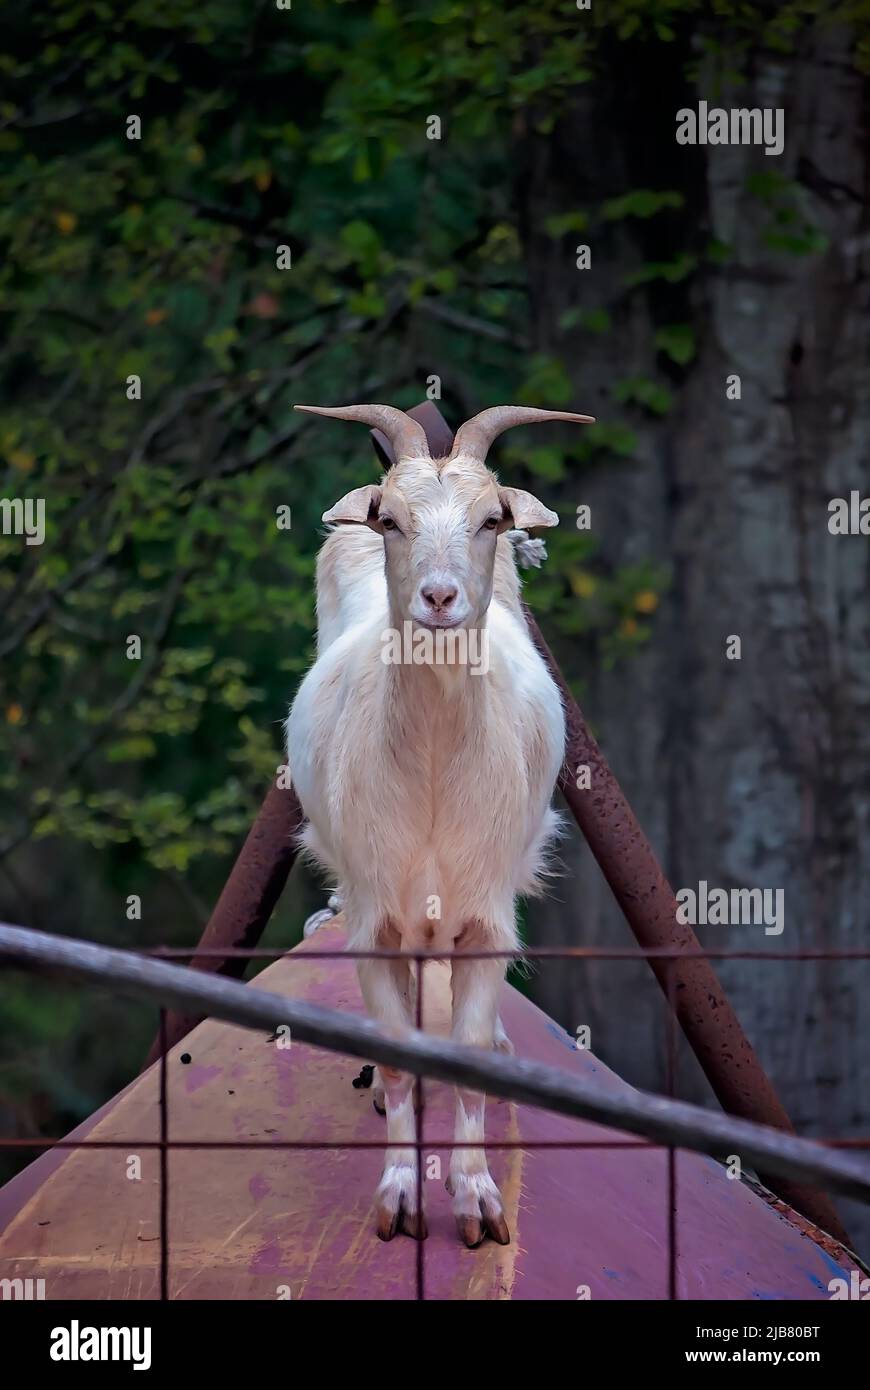 Nilla, a pet pygmy goat (Capra hircus), peers between fence rails, March 29, 2011, in Mobile, Alabama. Stock Photo